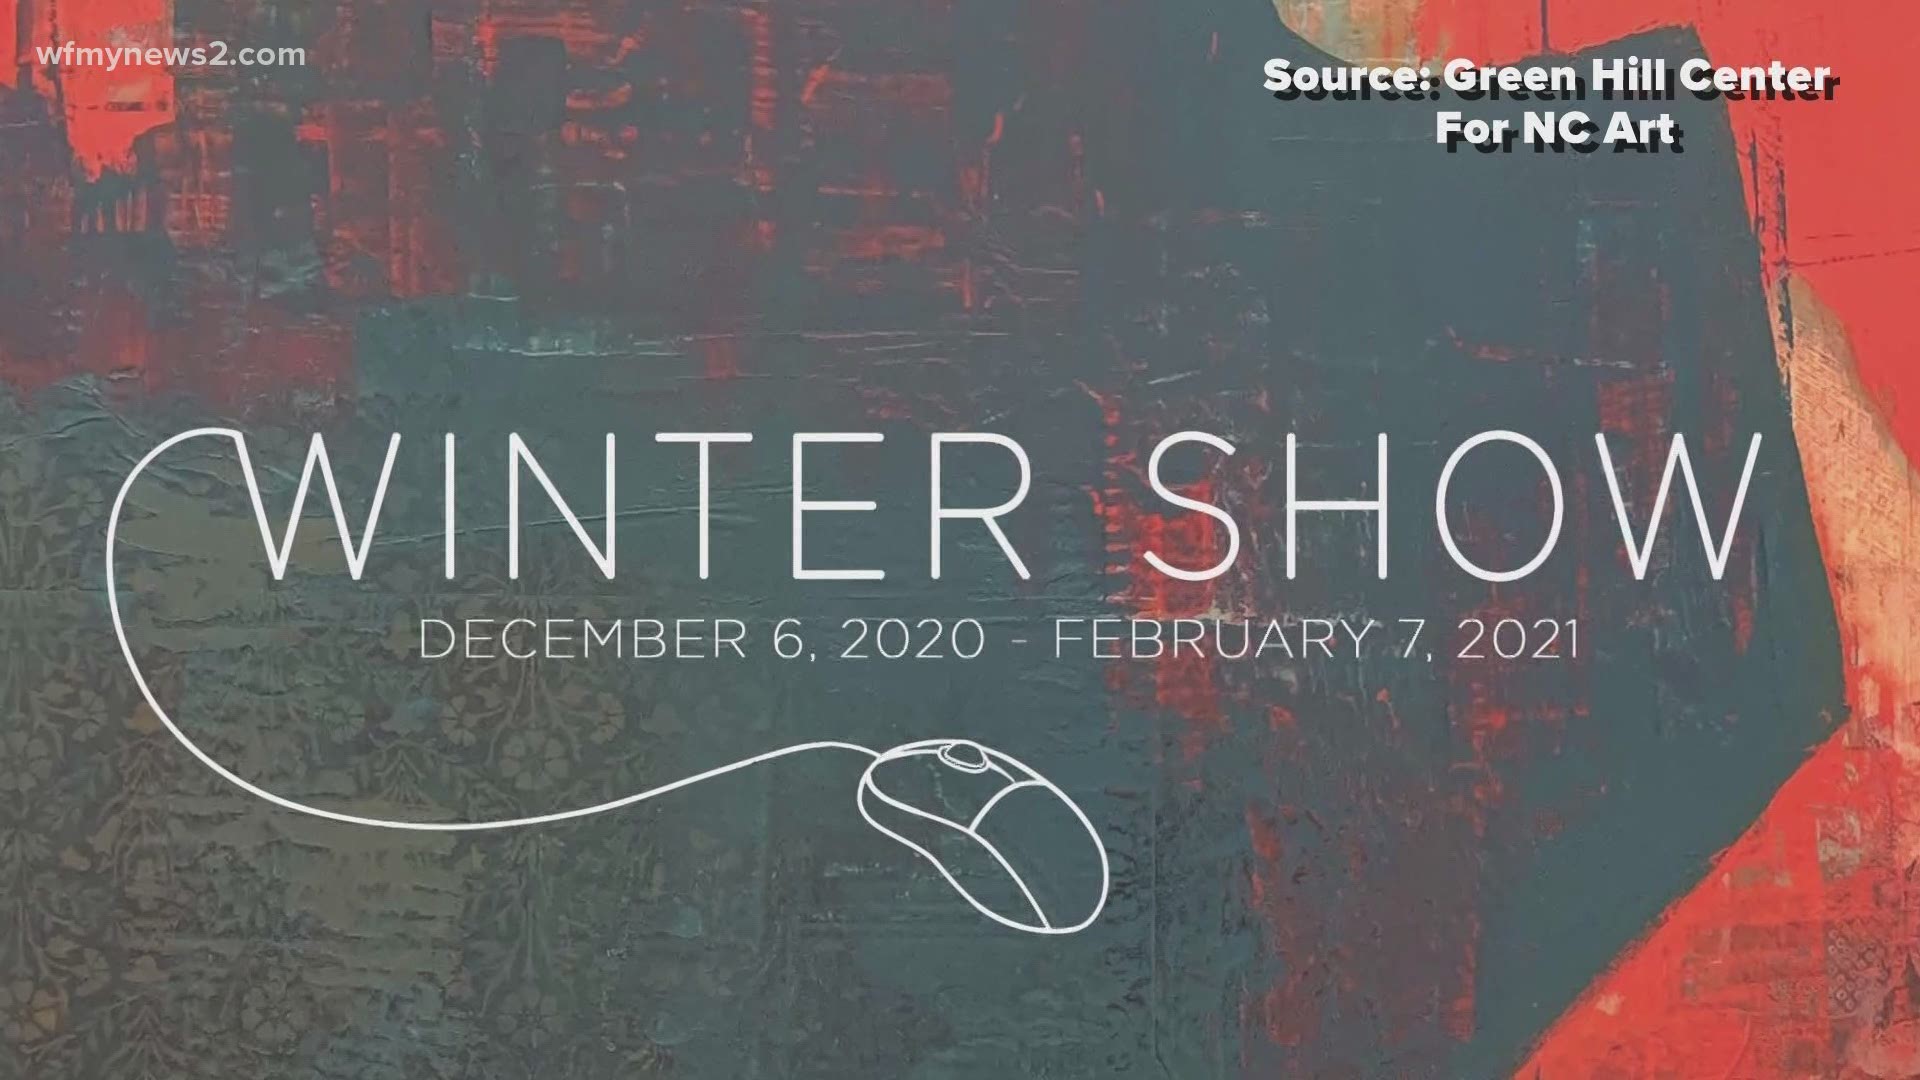 While the show may not be happening in person, there's plenty to be excited about for the annual Winter Show.